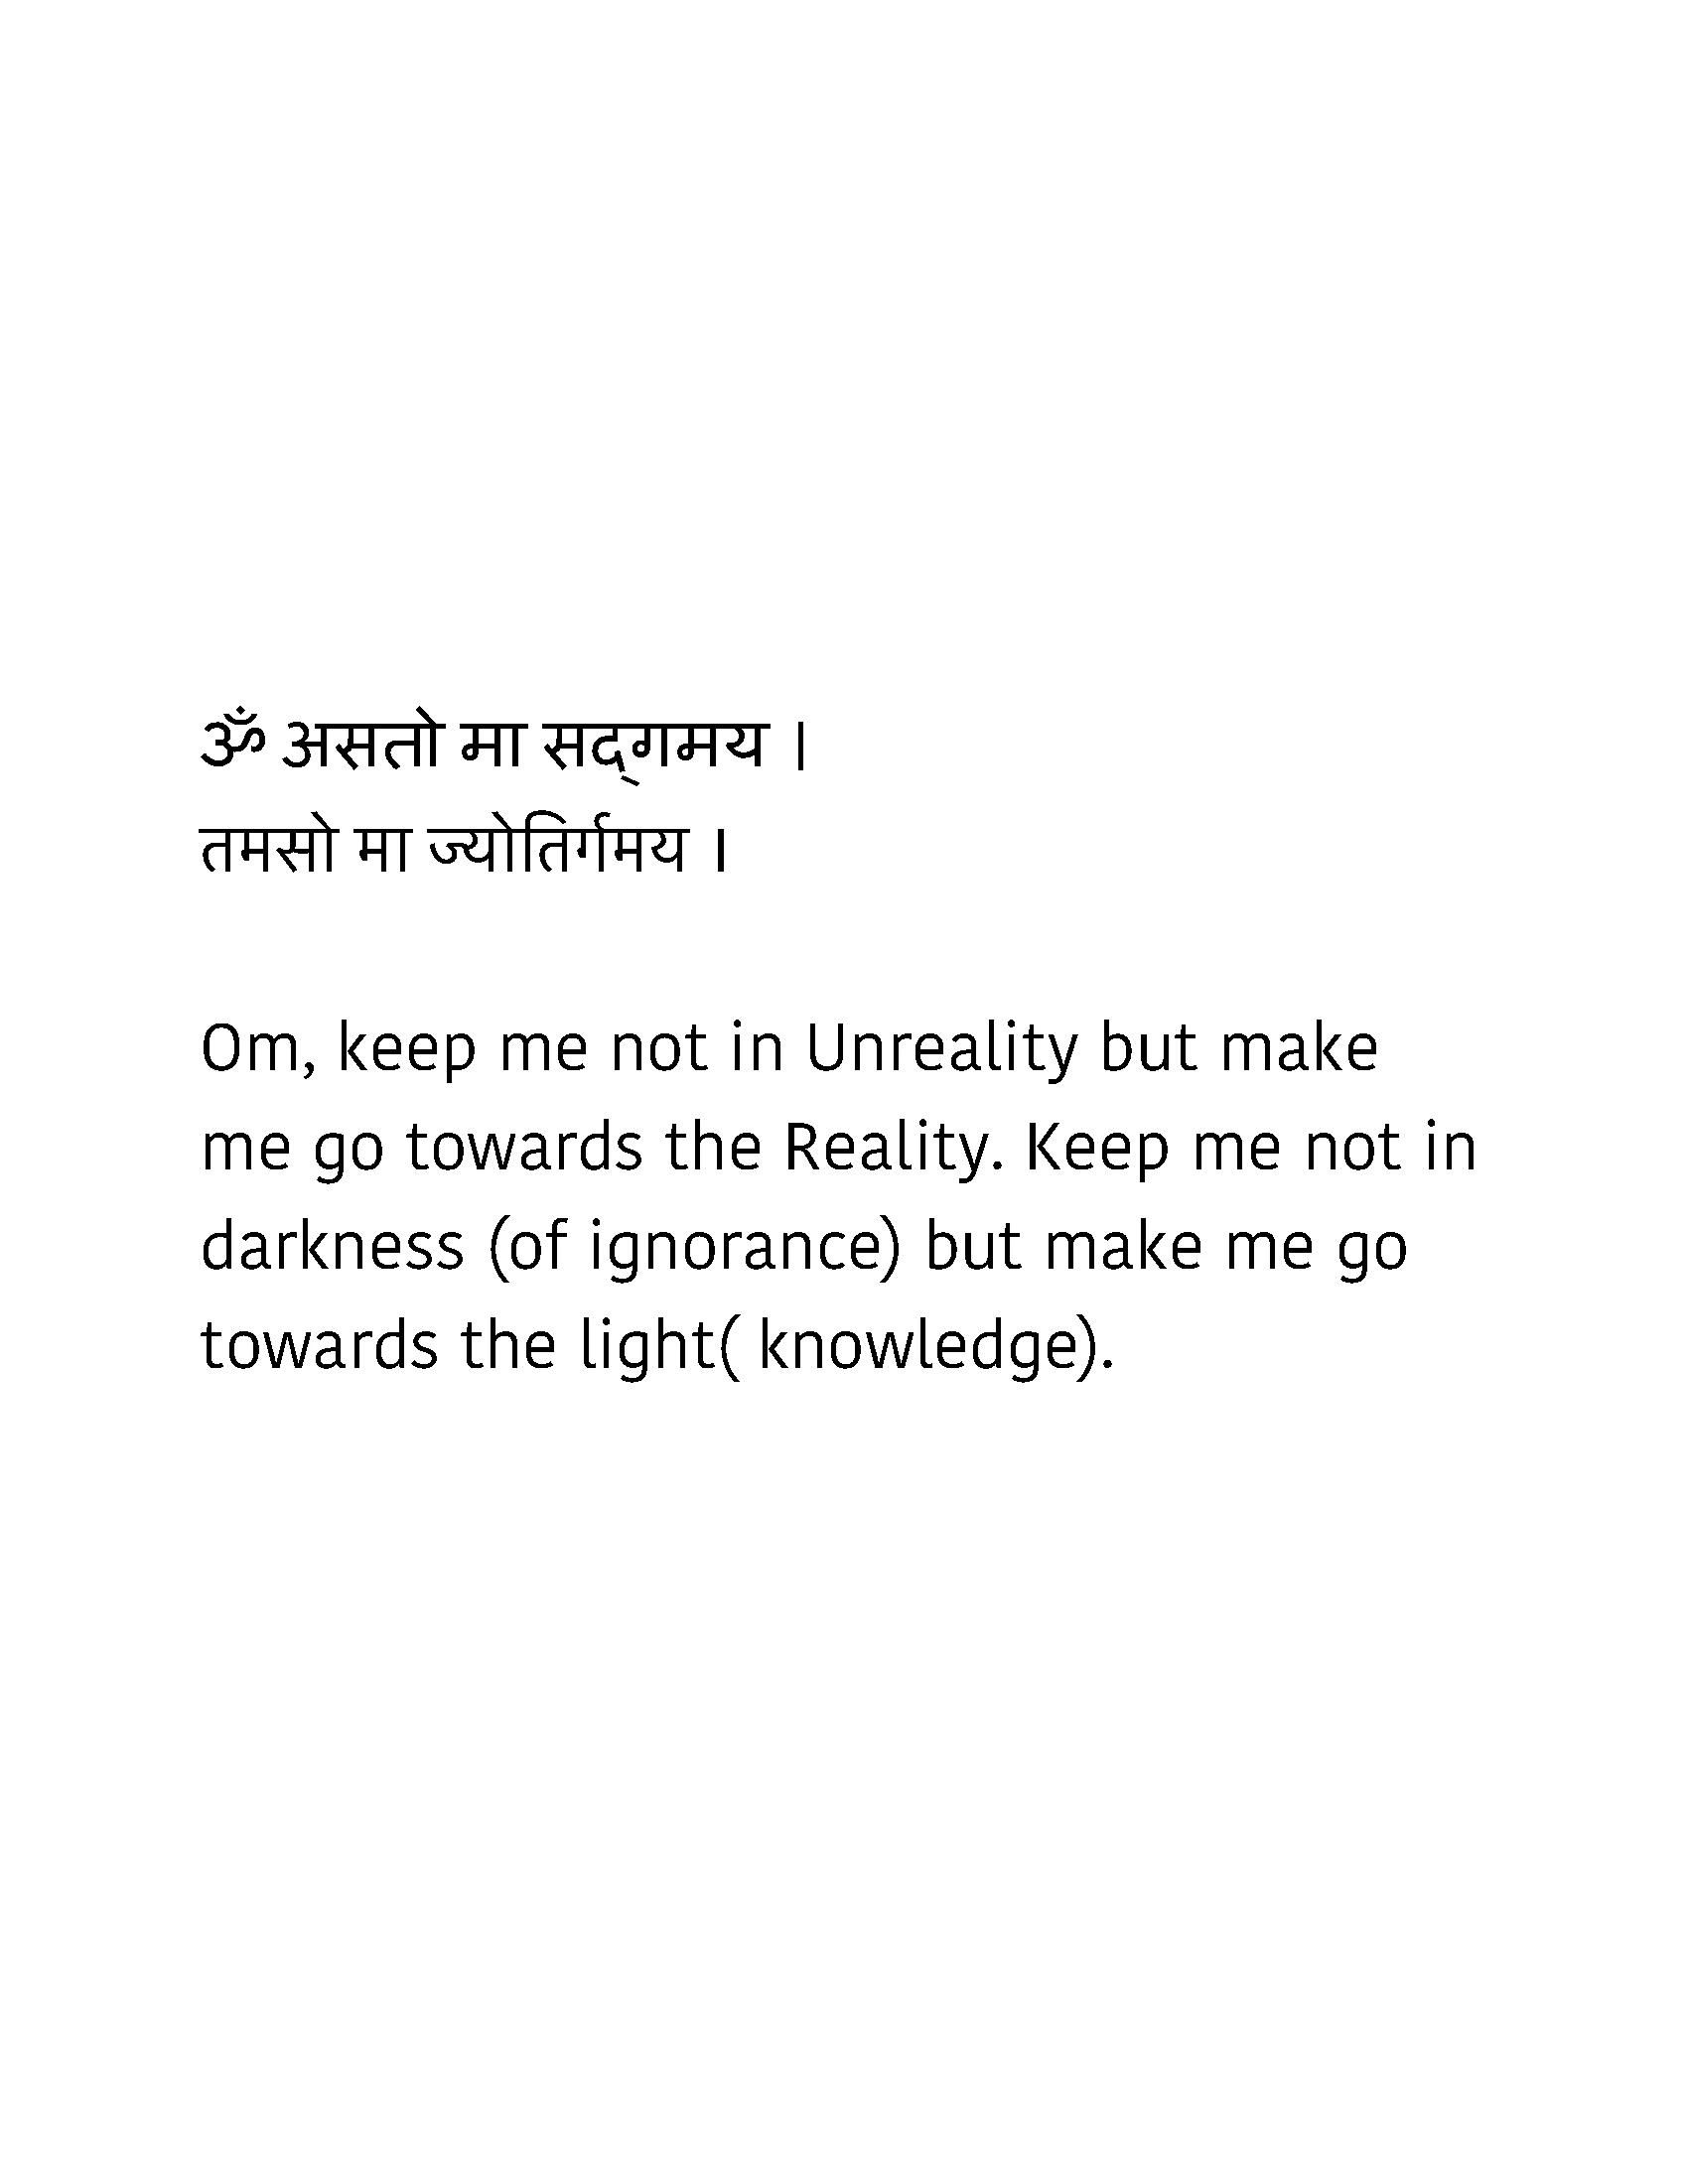 Make me go from ignorance to knowledge.